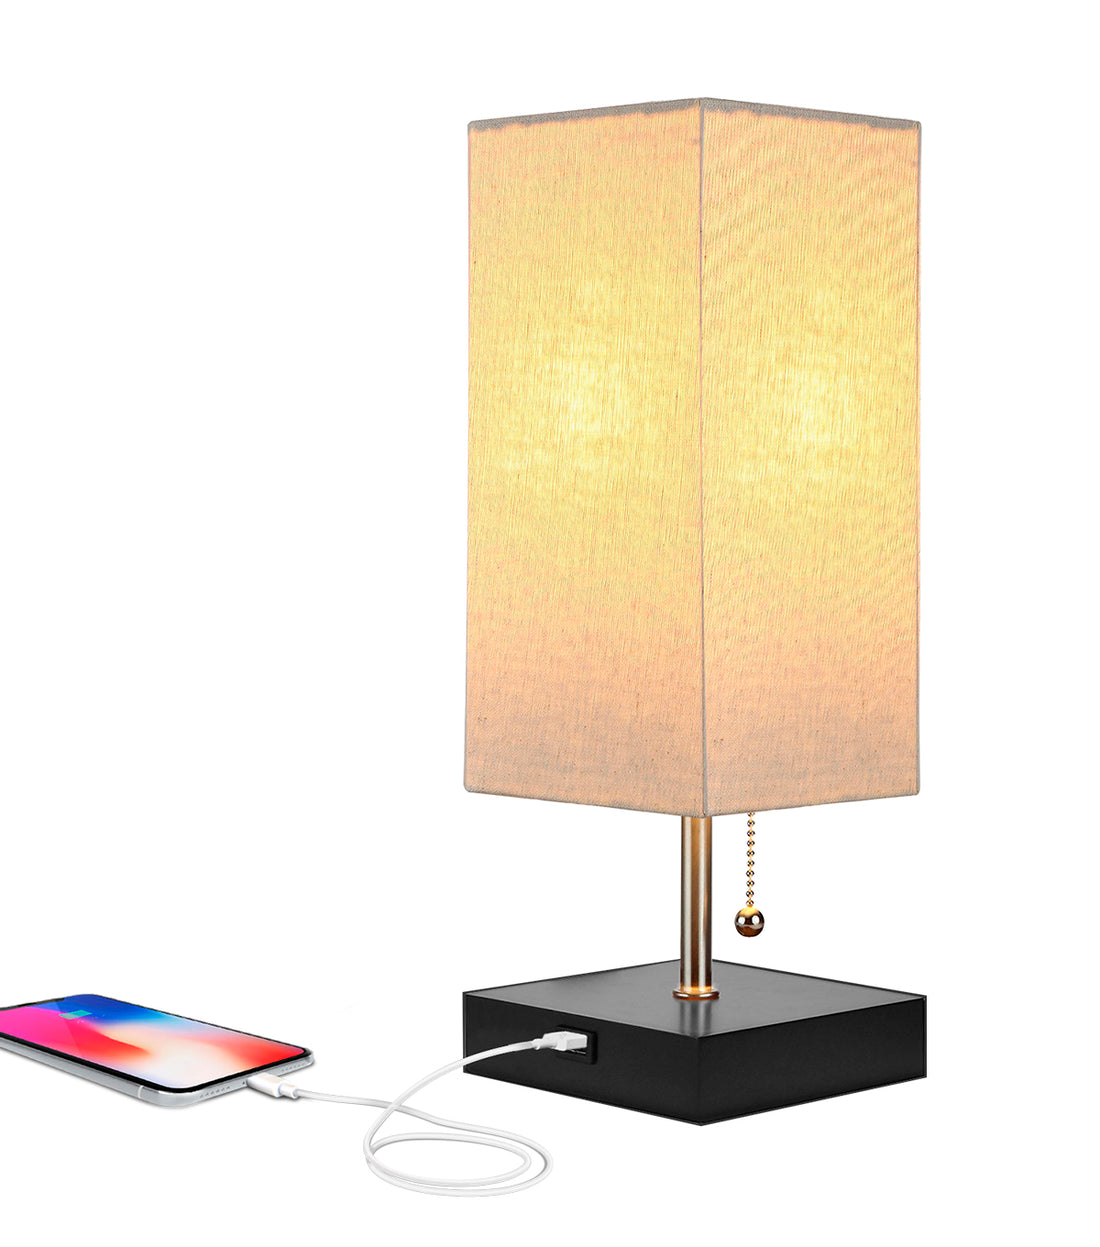 Brightech Grace LED USB Bedside Table & Desk Lamp – Modern Lamp with Soft, Ambient Light, Unique Lampshade & Functional USB Port – Perfect for Table in Bedroom, Living Room, or Office